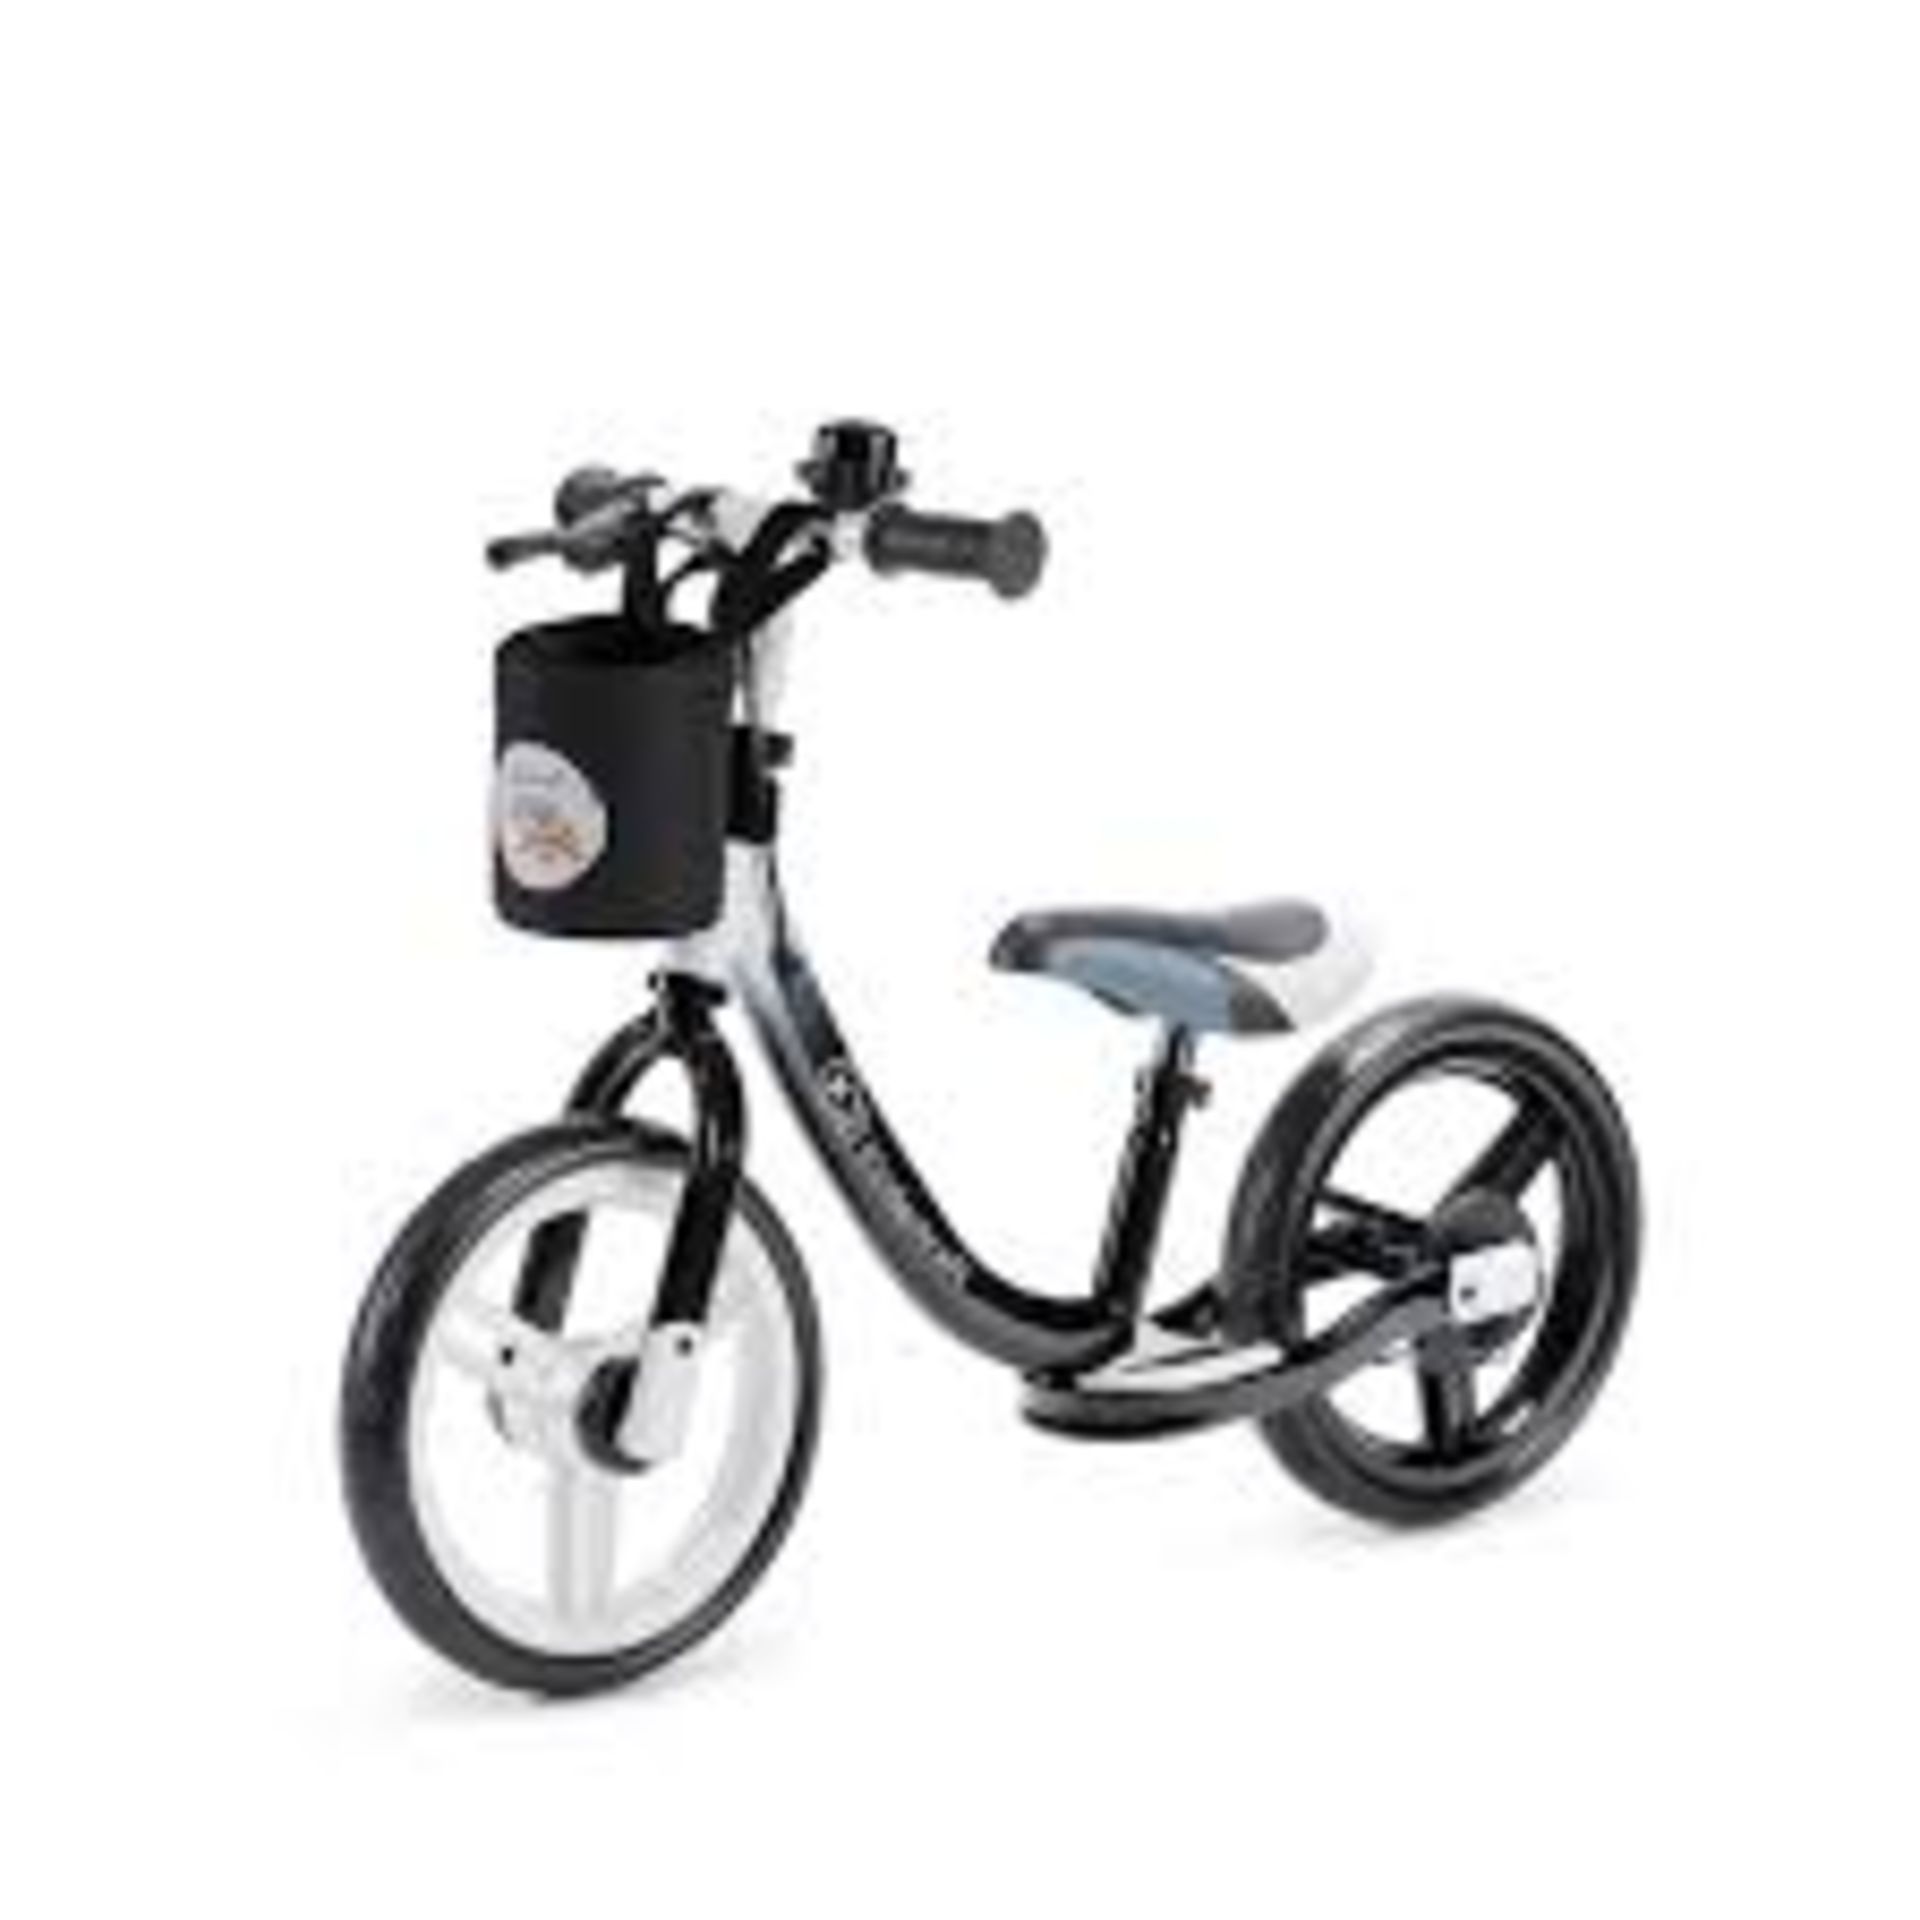 BOXED KINDERKRAFT "SPACE" BALANCE BIKE RRP £44.90Condition ReportAppraisal Available on Request- All